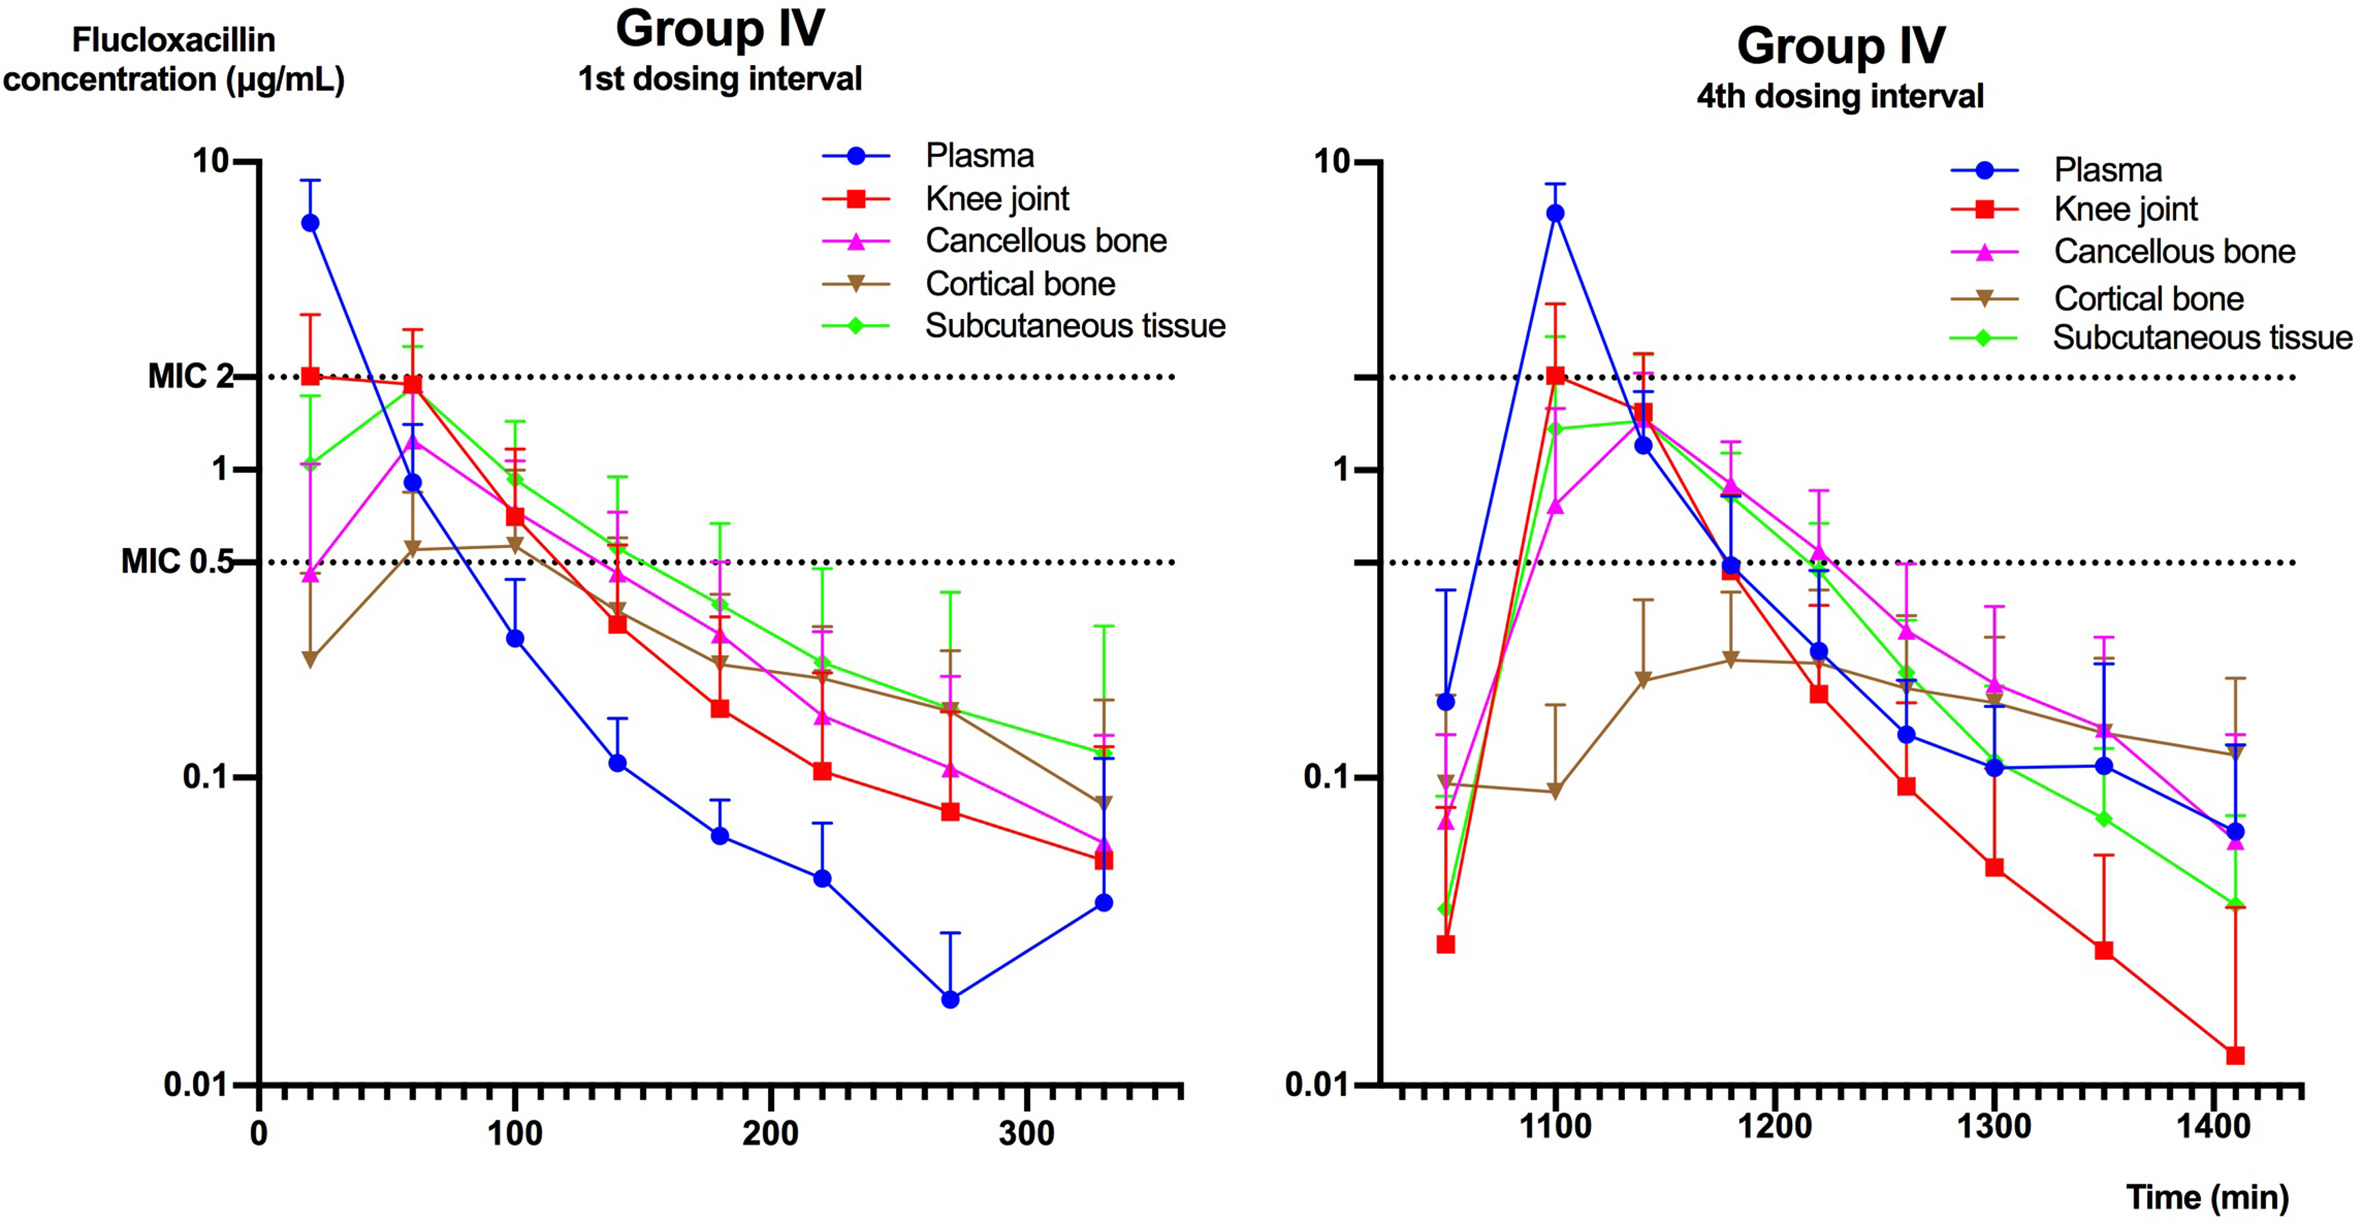 Fig. 2 
          Mean concentration-time profiles in Group IV for plasma, subcutaneous tissue, knee joint, and cancellous and cortical bone. The error bars represent upper 95% confidence intervals (CIs). The figure displays the profiles of the first and the fourth dosing intervals. Minimum inhibitory concentrations (MICs) of 0.5 μg/ml and 2.0 μg/ml are indicated by the dotted horizontal lines (y-axis is log-scaled).
        